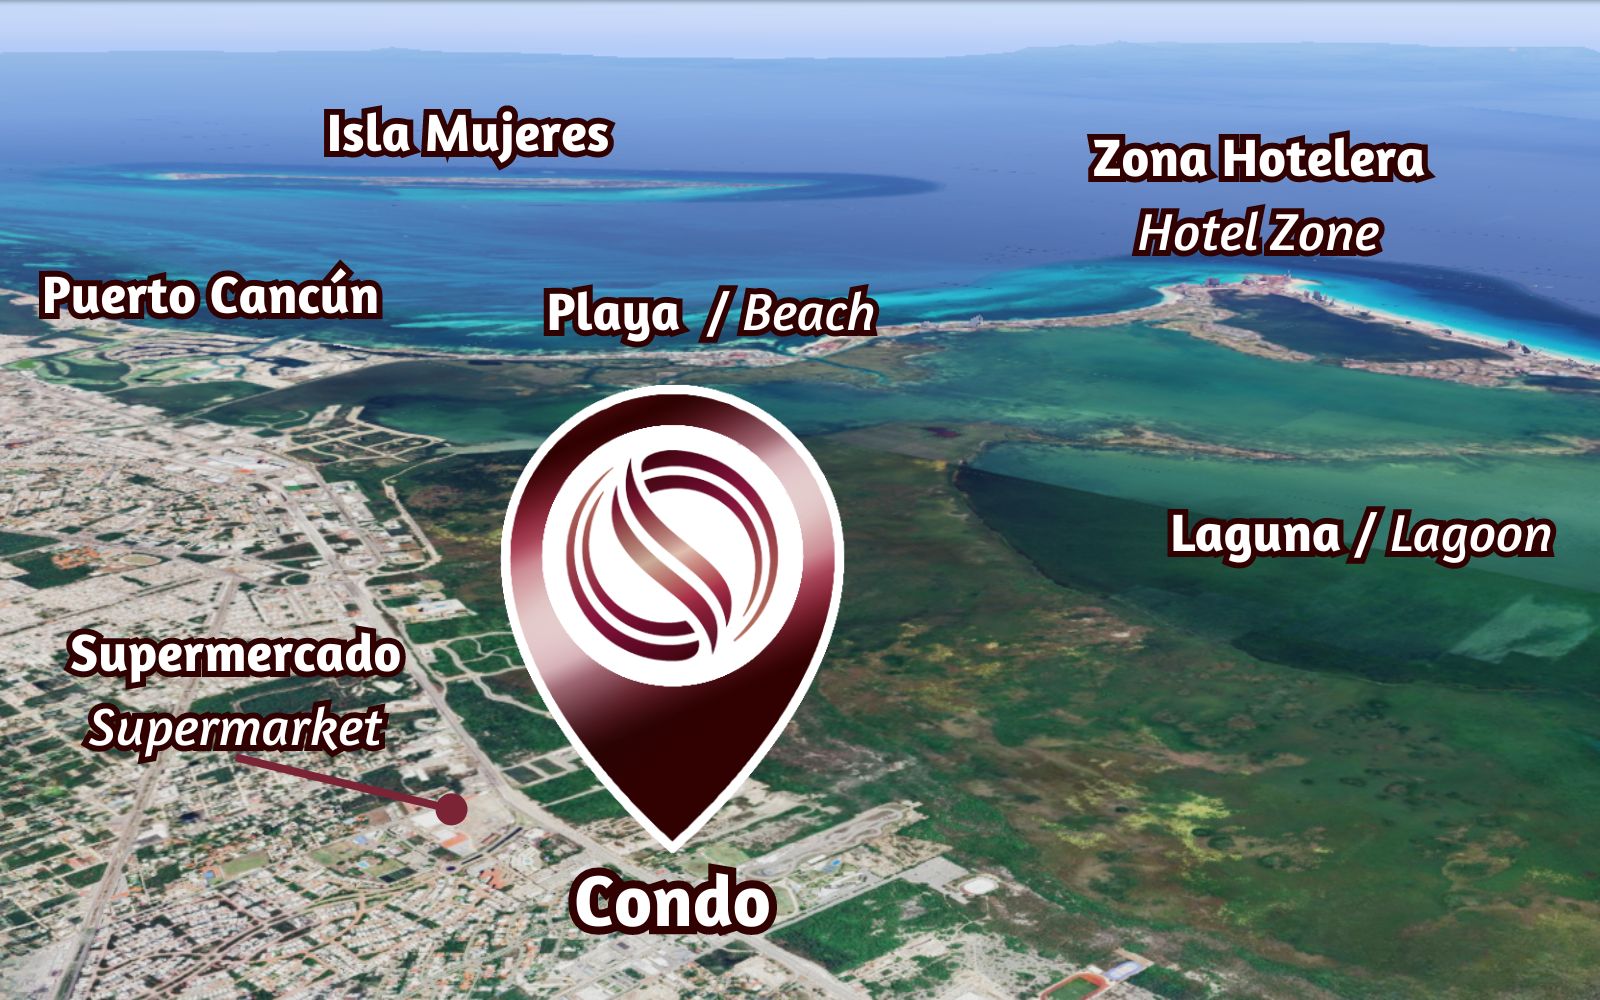 Condo with concierge, cinema, spa, gym, sky lounge, restaurant, dog area and more amenities in pre-construction, Cancun for sale.